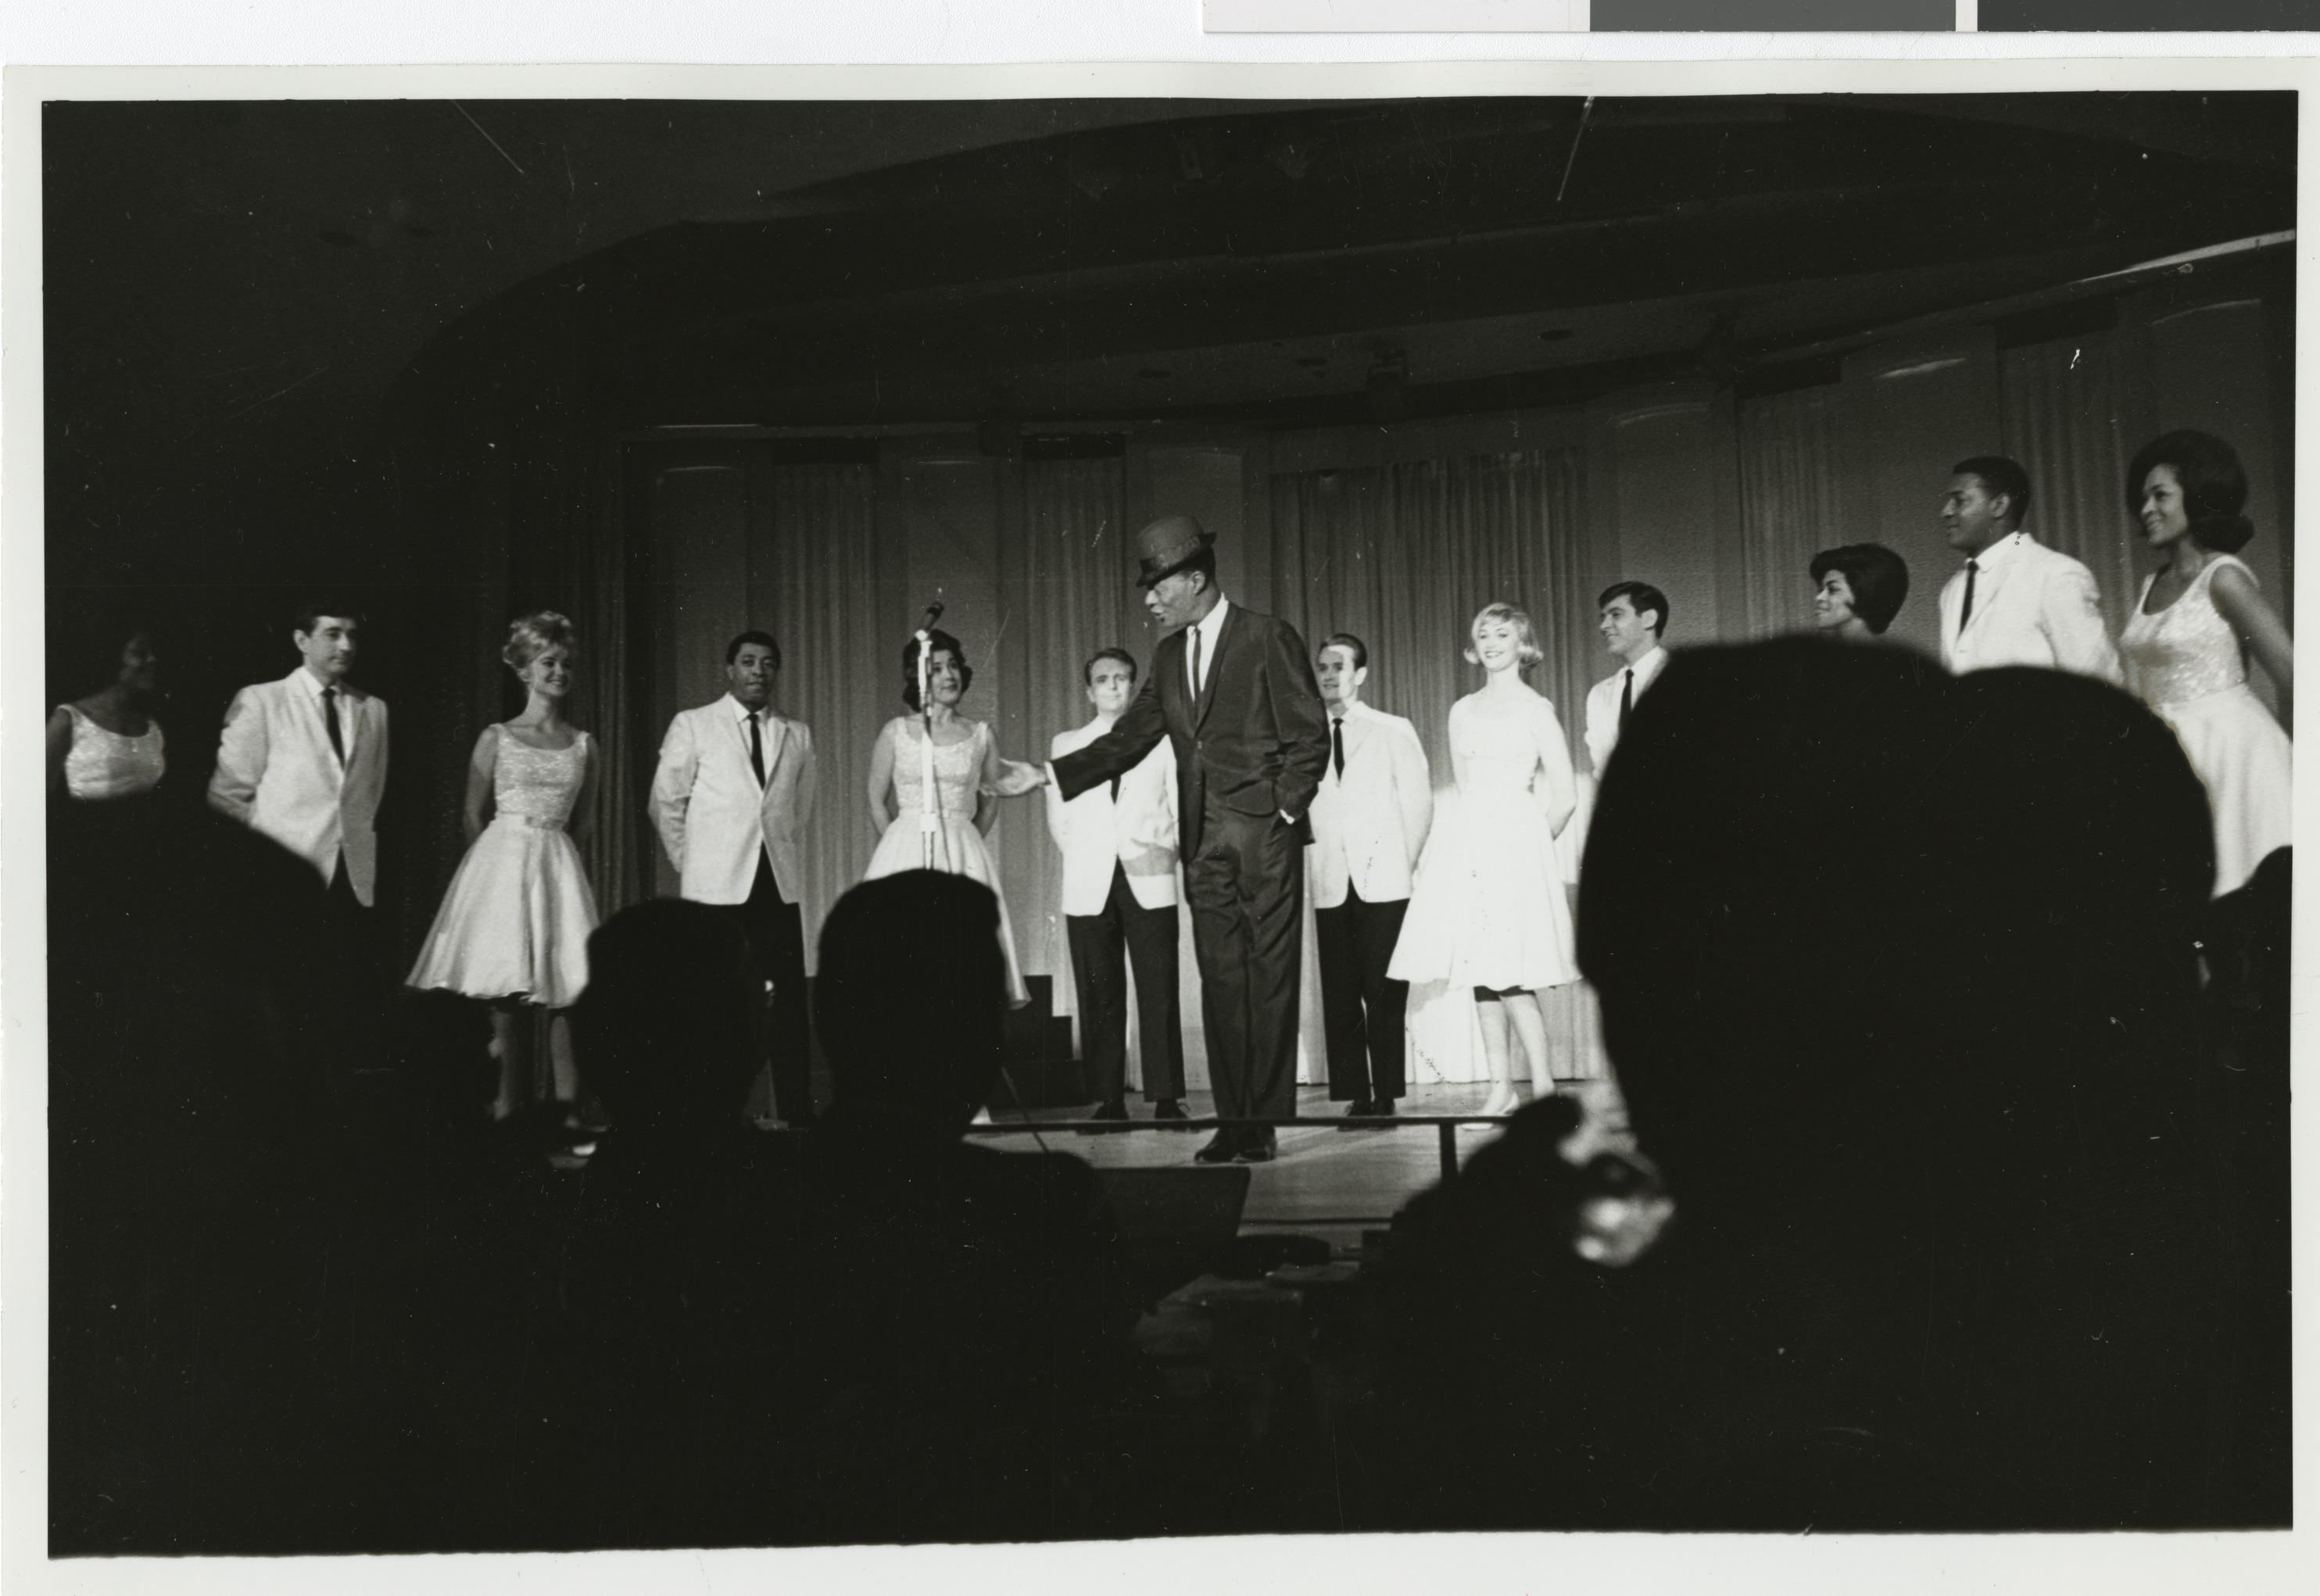 Cole on stage, Image 15